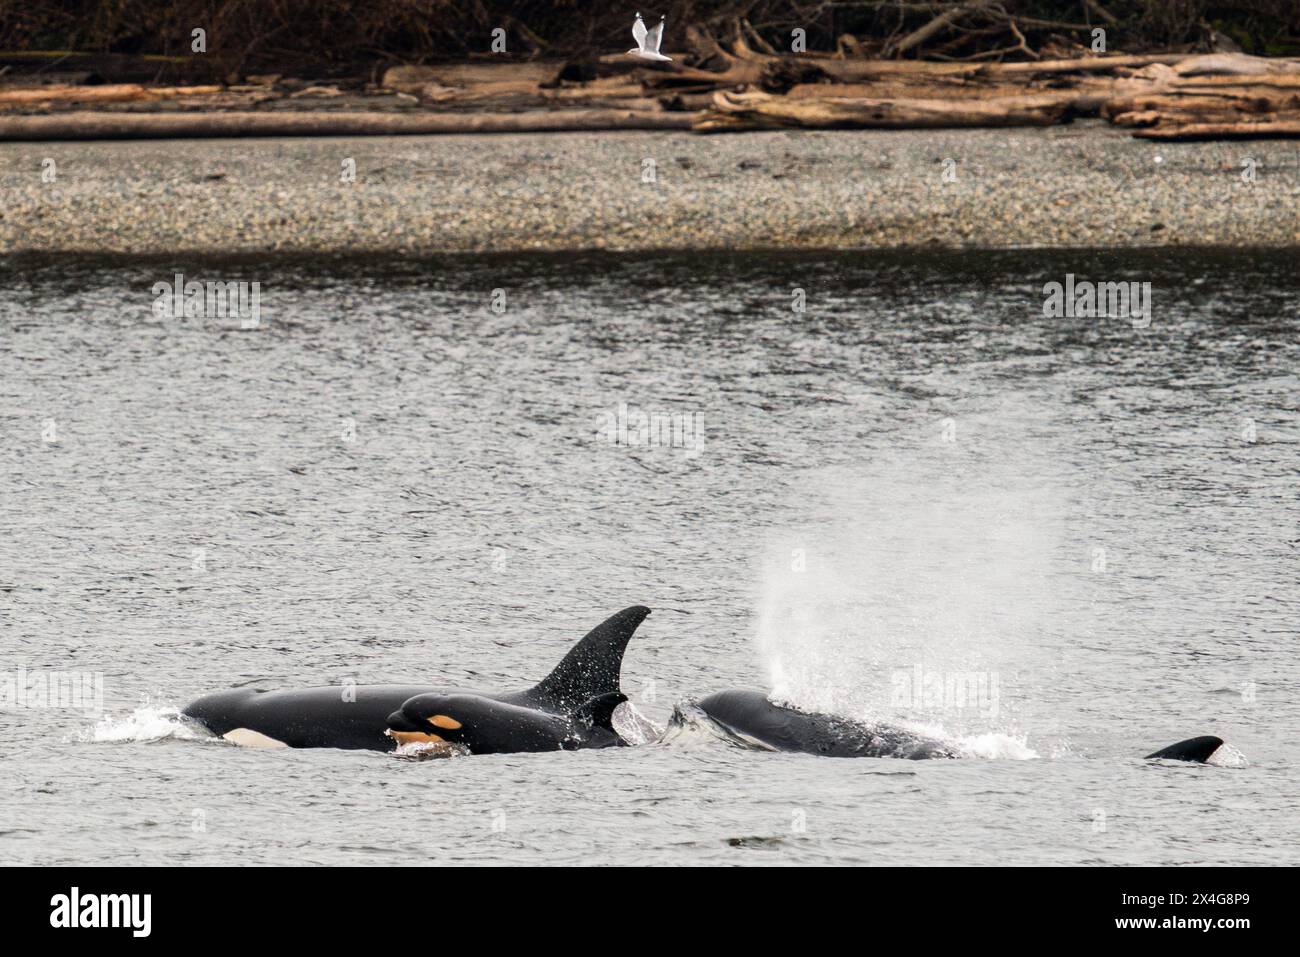 Closeup view of a pod of orca whales swimming together Stock Photo